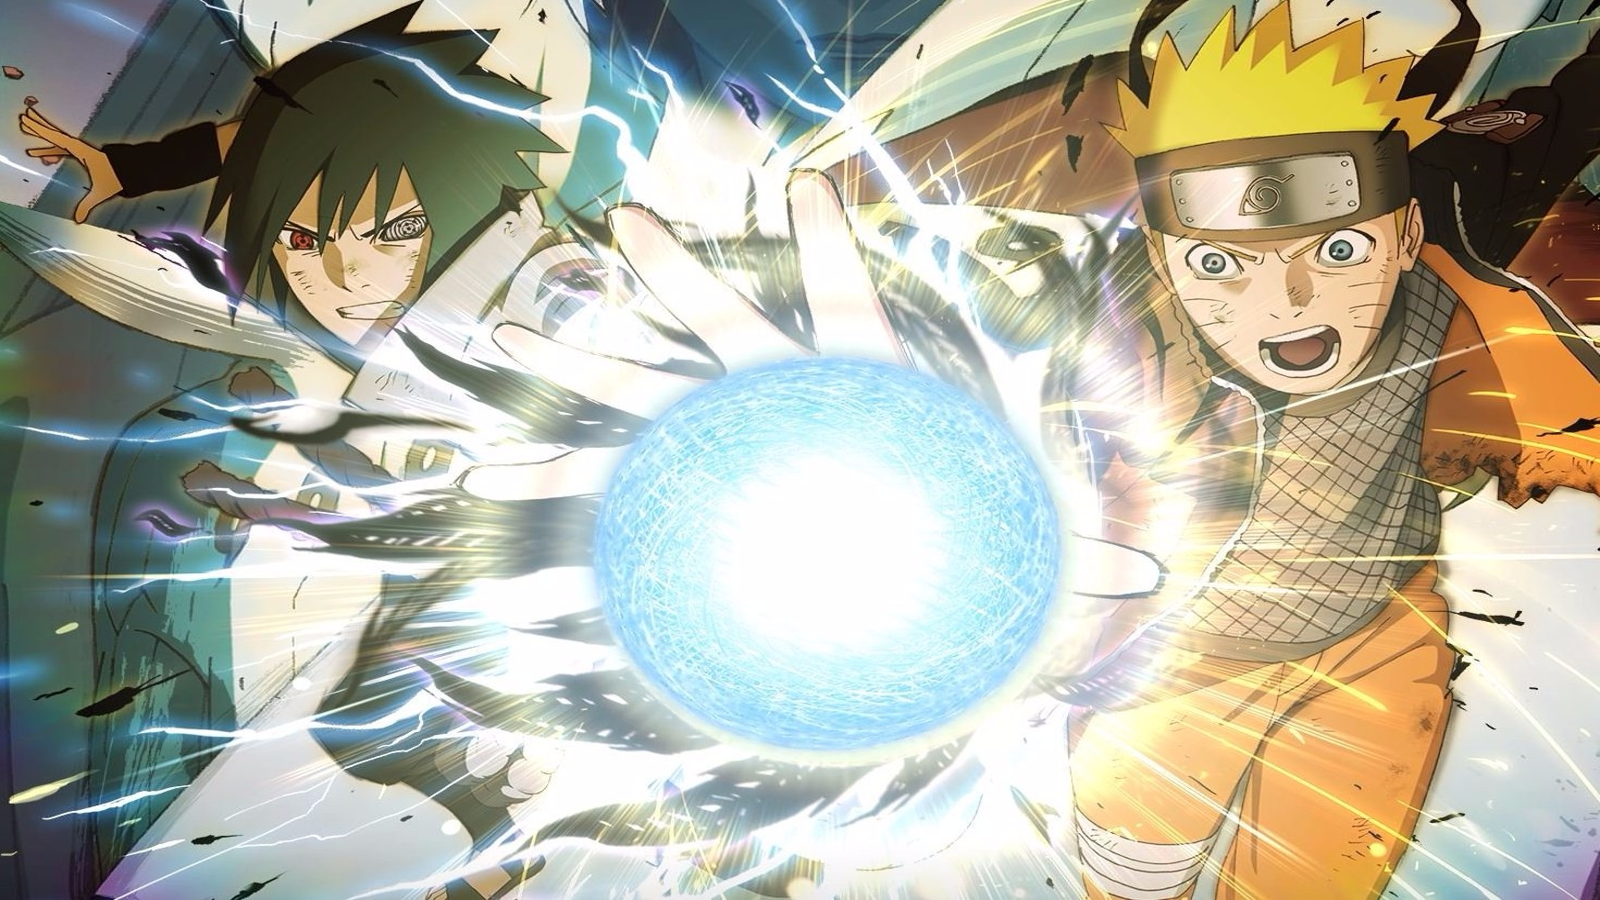 What to watch after Naruto Shippuden: Four anime series that match